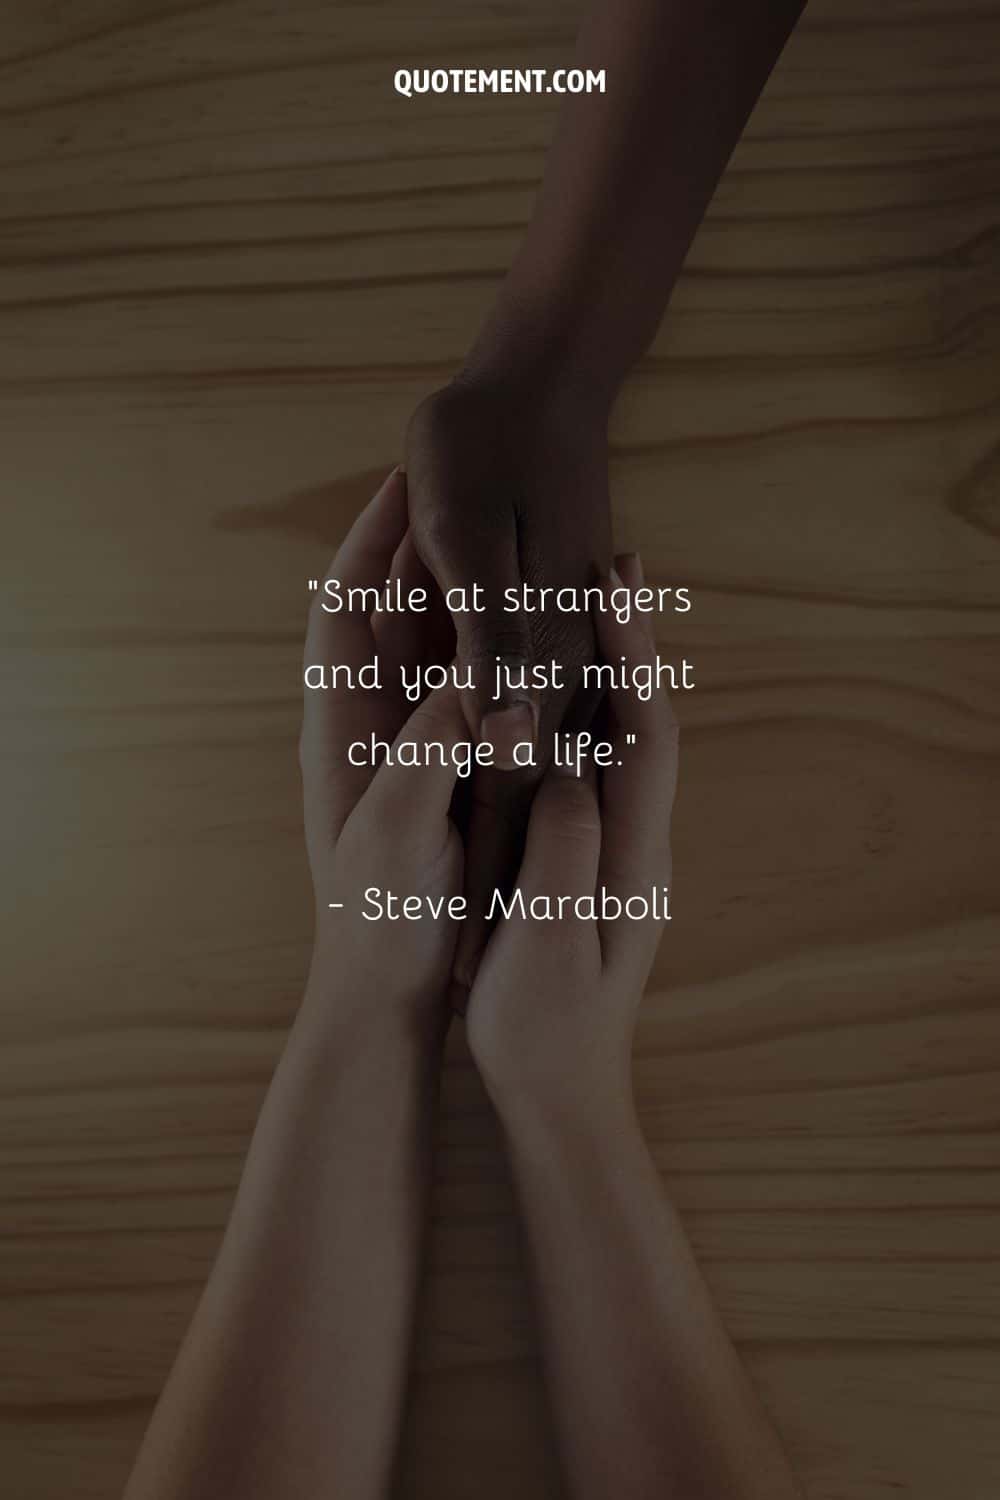 Smile at strangers and you just might change a life.